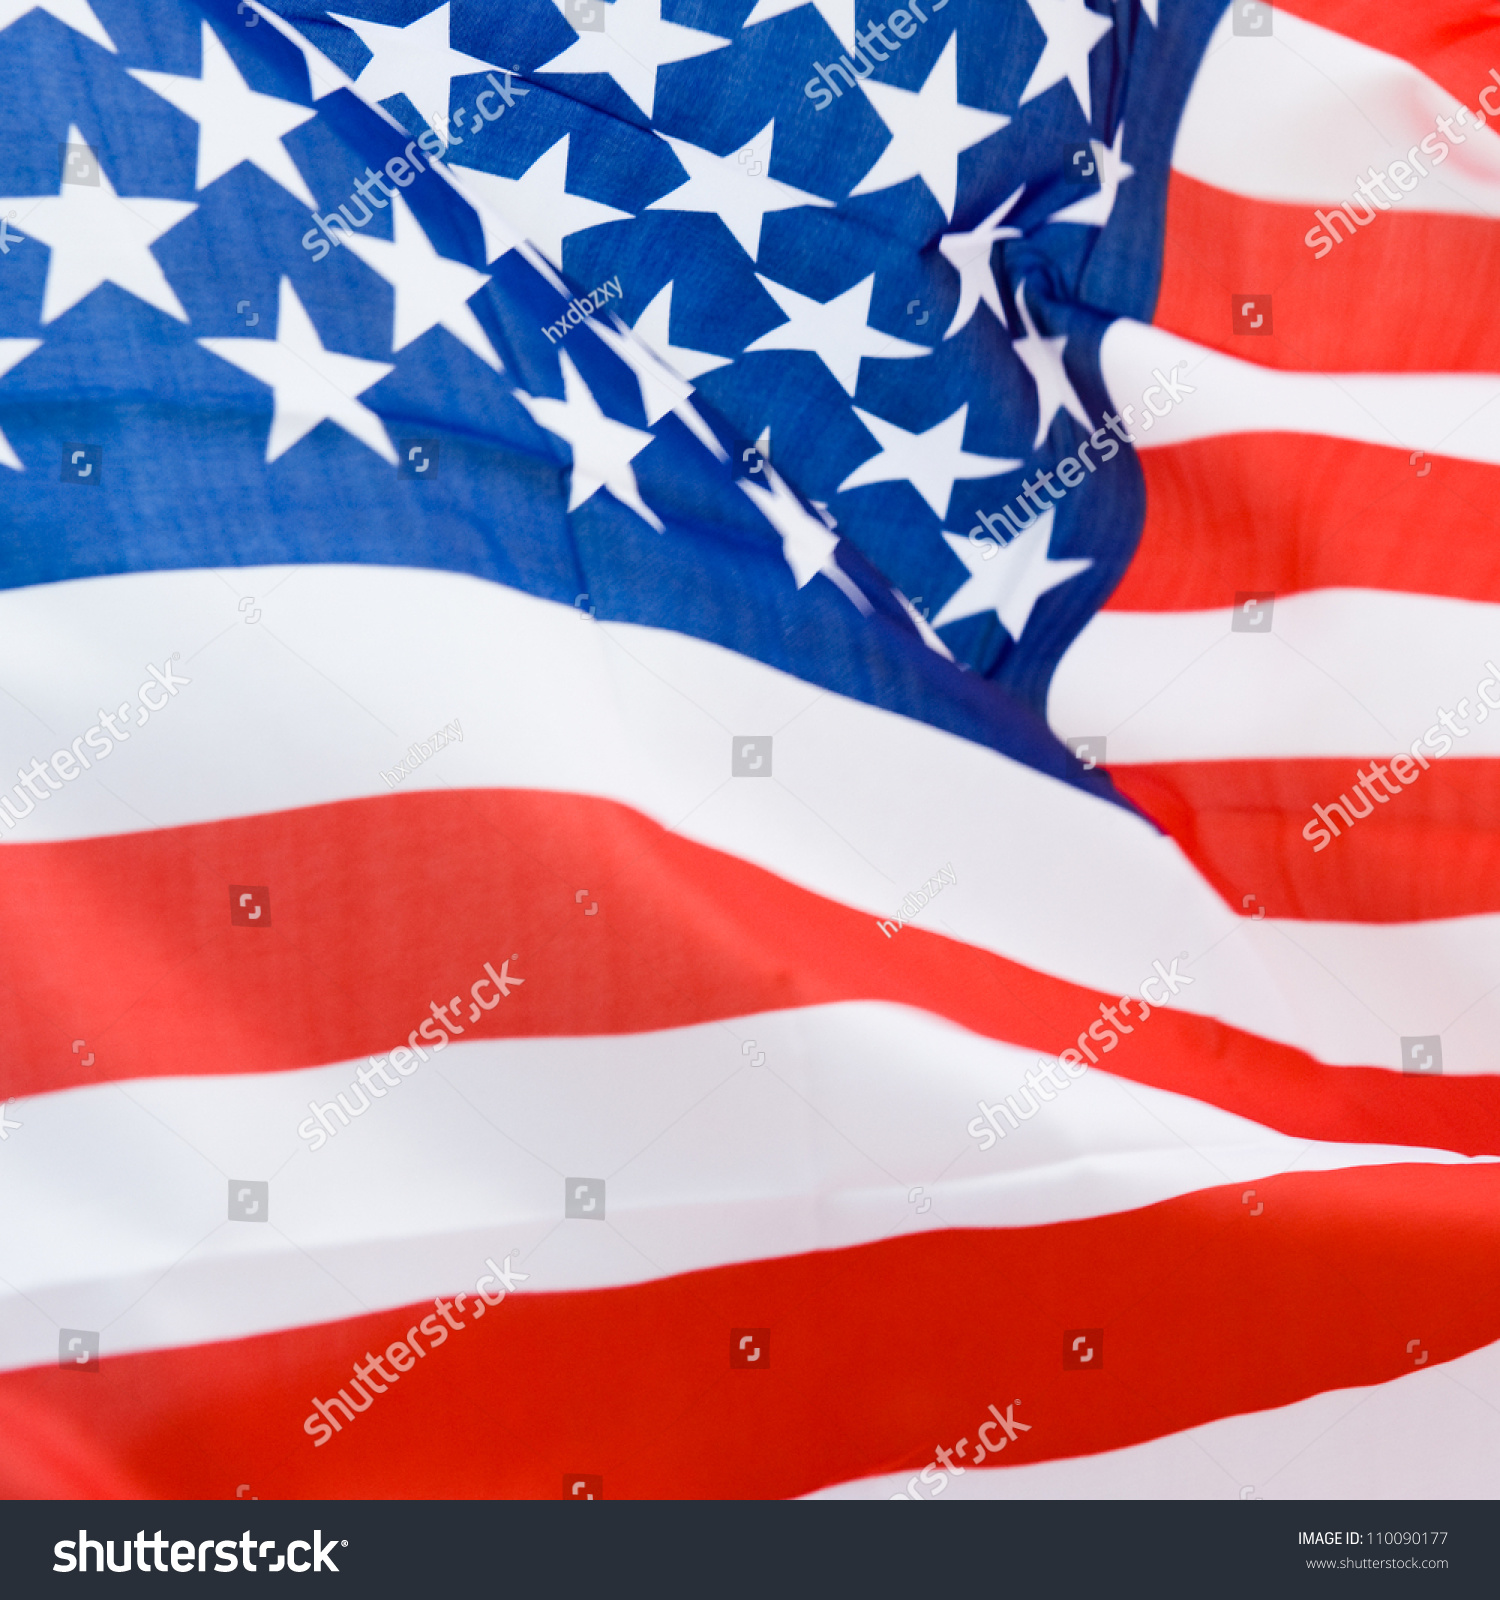 Close-Up Shot Of Wavy American Flag. Stock Photo 110090177 : Shutterstock